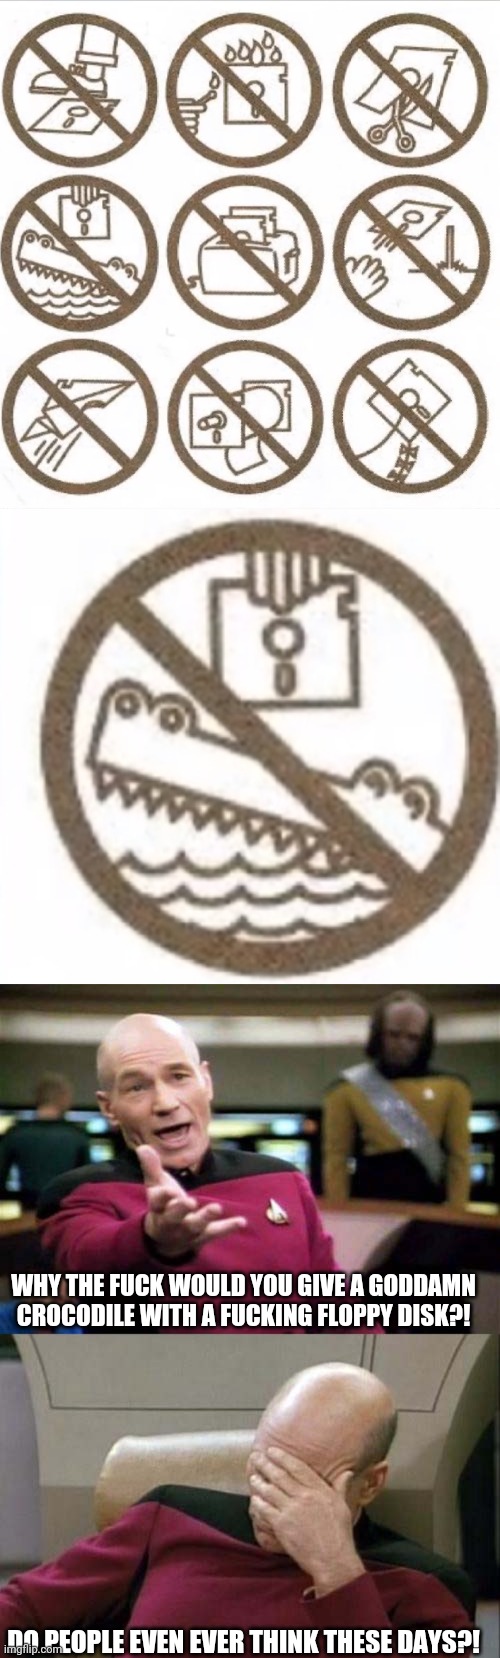 Floppies are bad for crocs and crocos. PETA angry now. | WHY THE FUCK WOULD YOU GIVE A GODDAMN CROCODILE WITH A FUCKING FLOPPY DISK?! DO PEOPLE EVEN EVER THINK THESE DAYS?! | image tagged in picard wtf and facepalm combined,stupidity,wtf | made w/ Imgflip meme maker